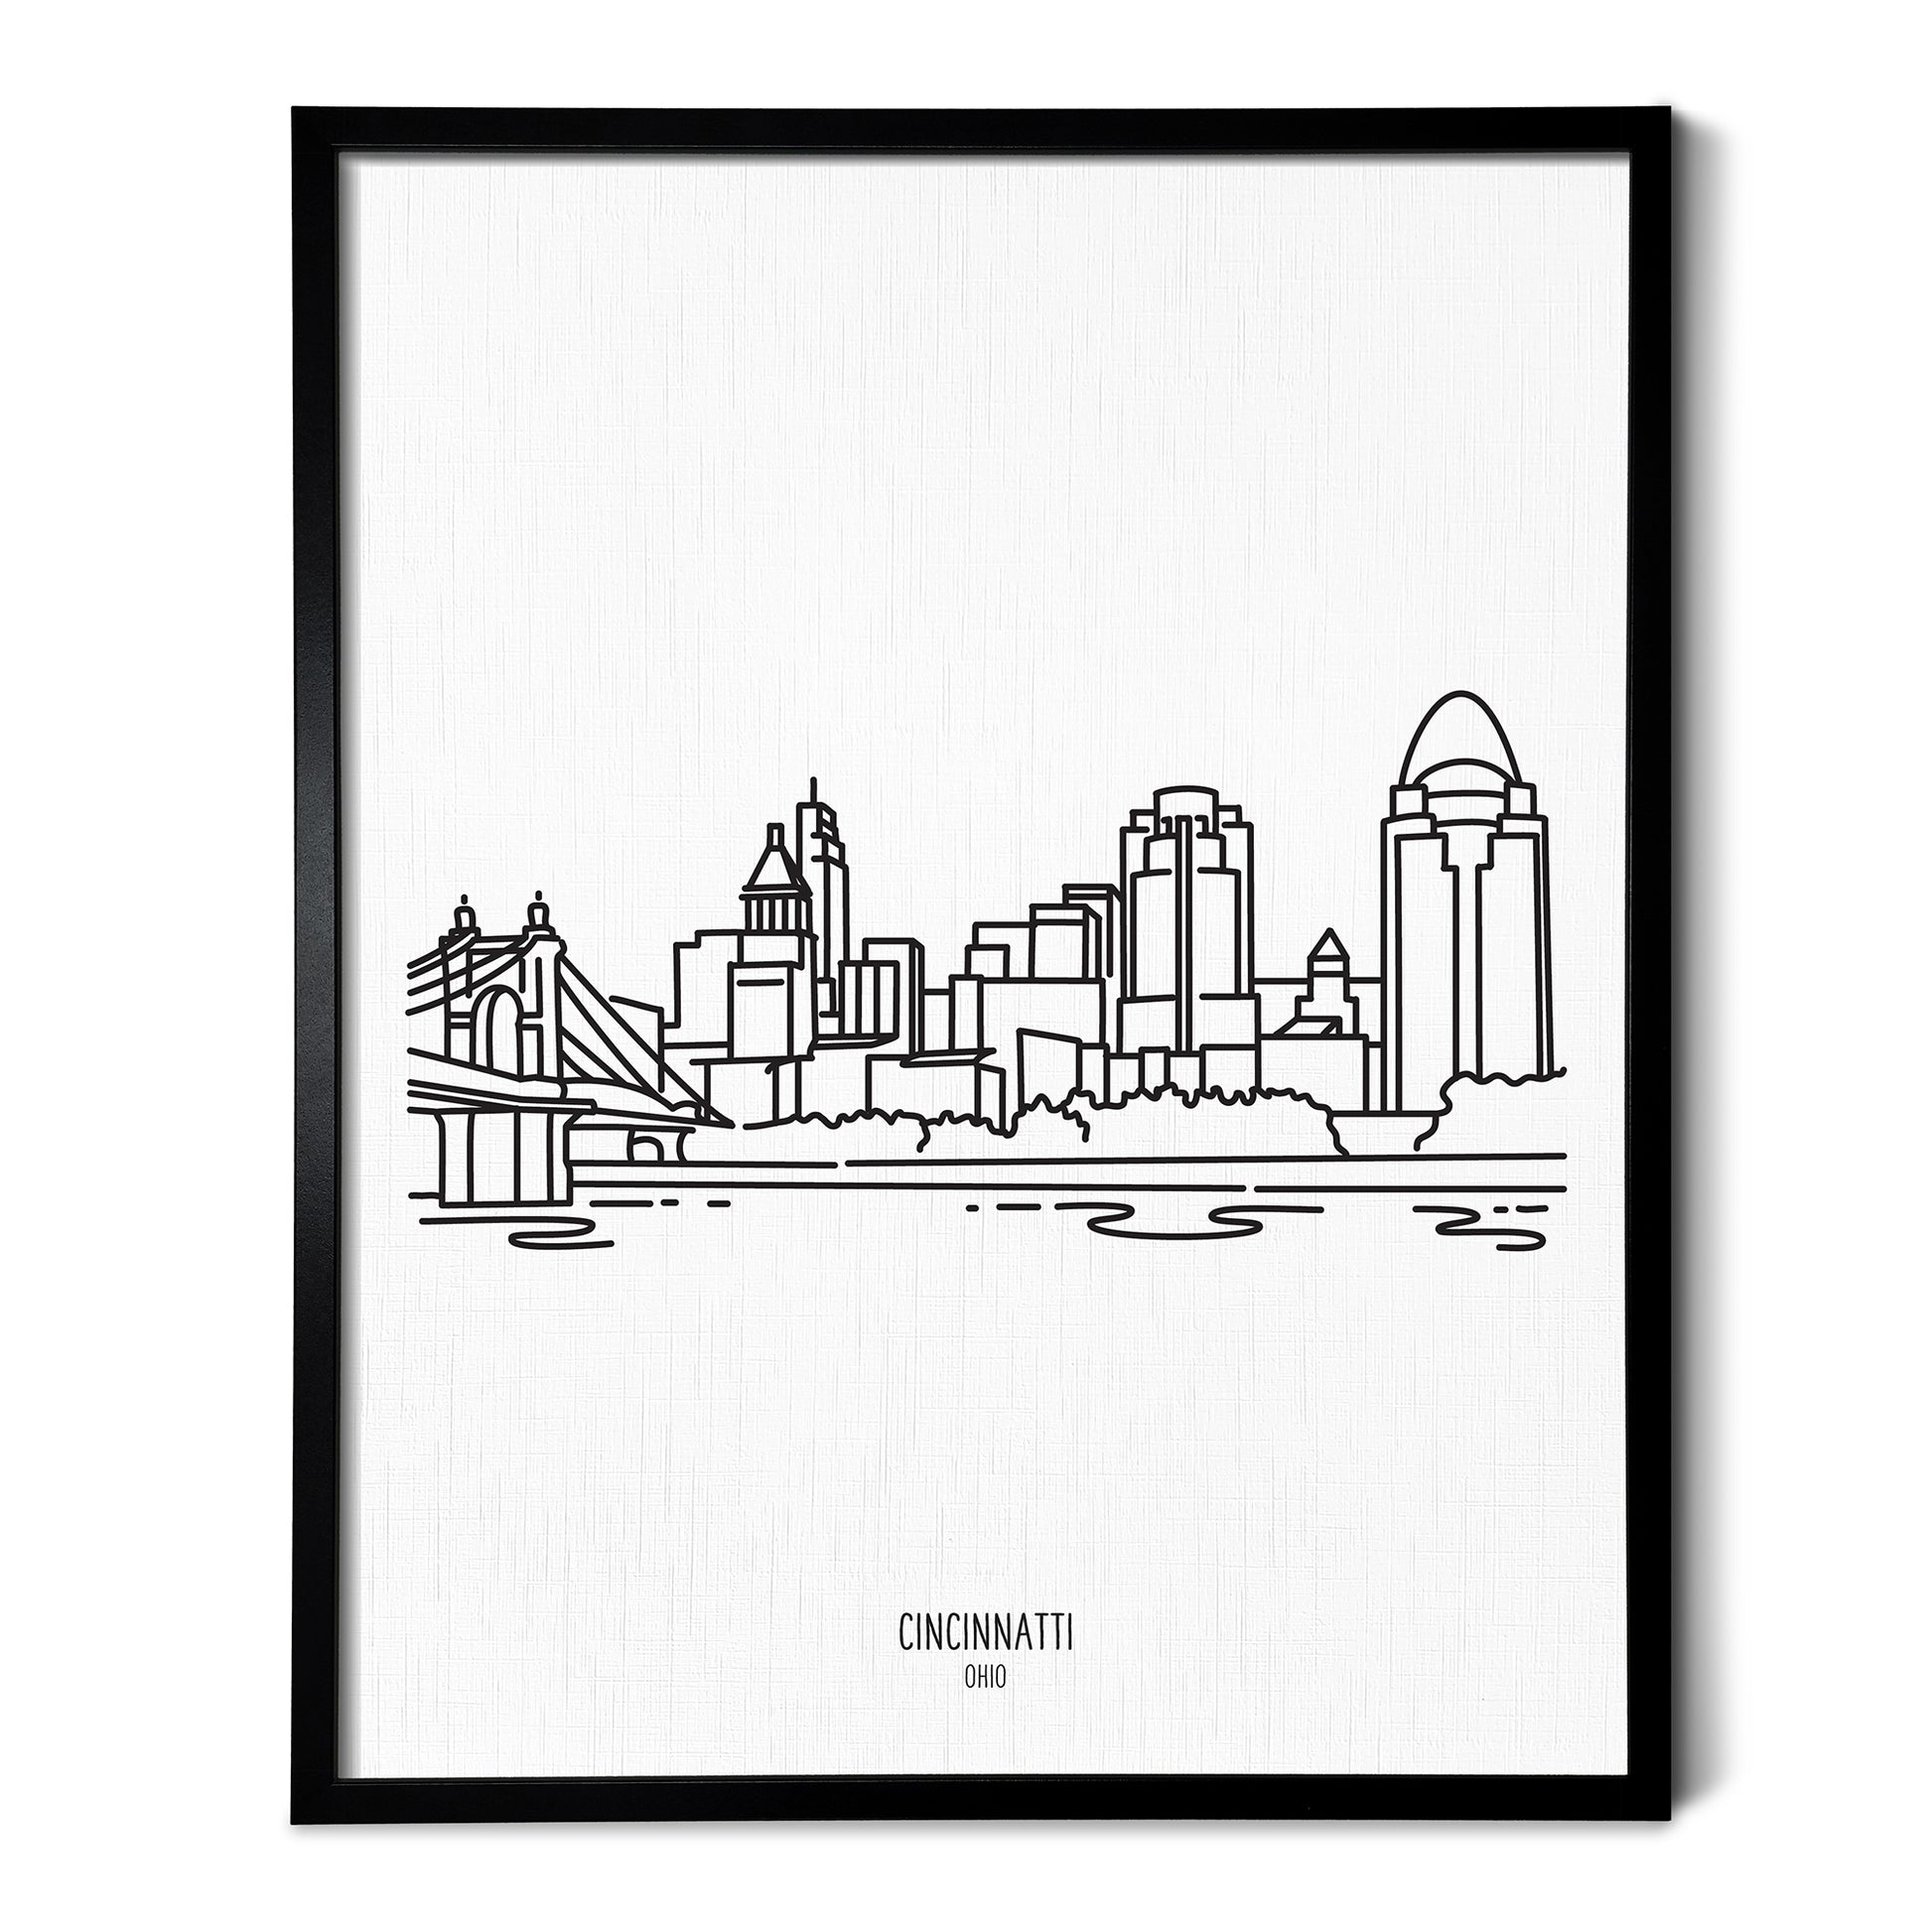 A line art drawing of the Cincinnati Ohio Skyline on white linen paper in a thin black picture frame